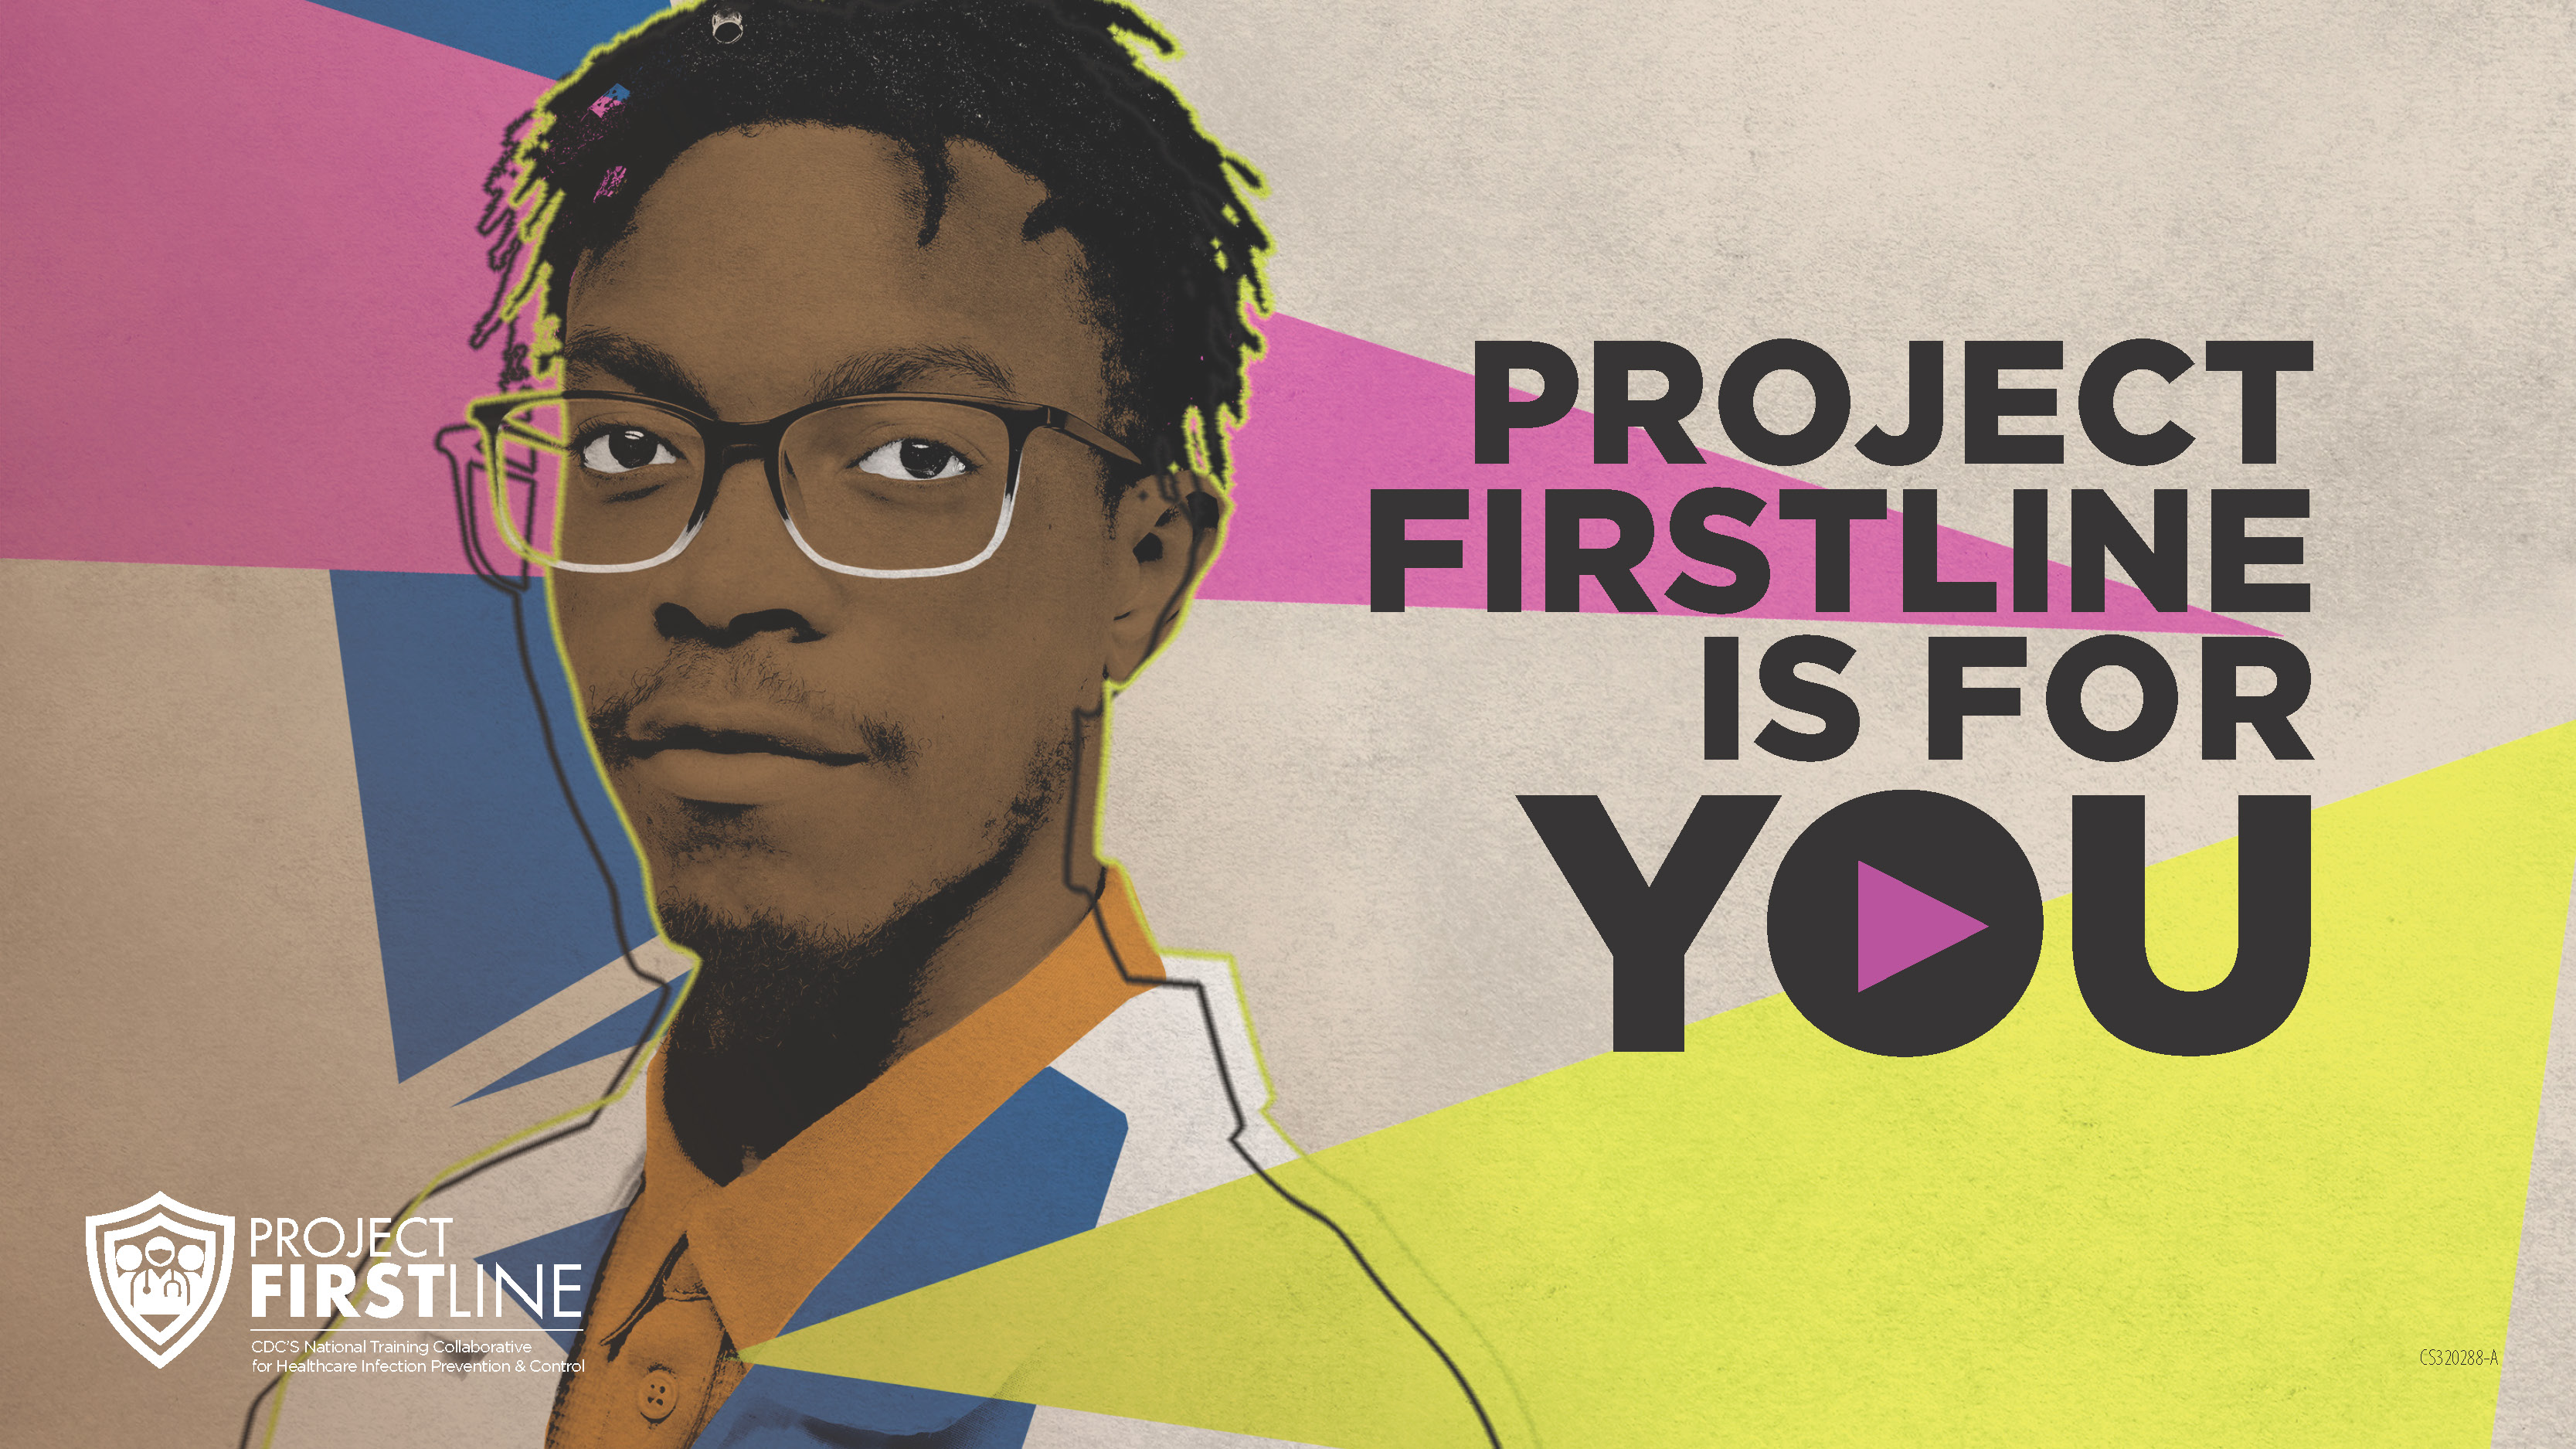 Project Firstline is for You